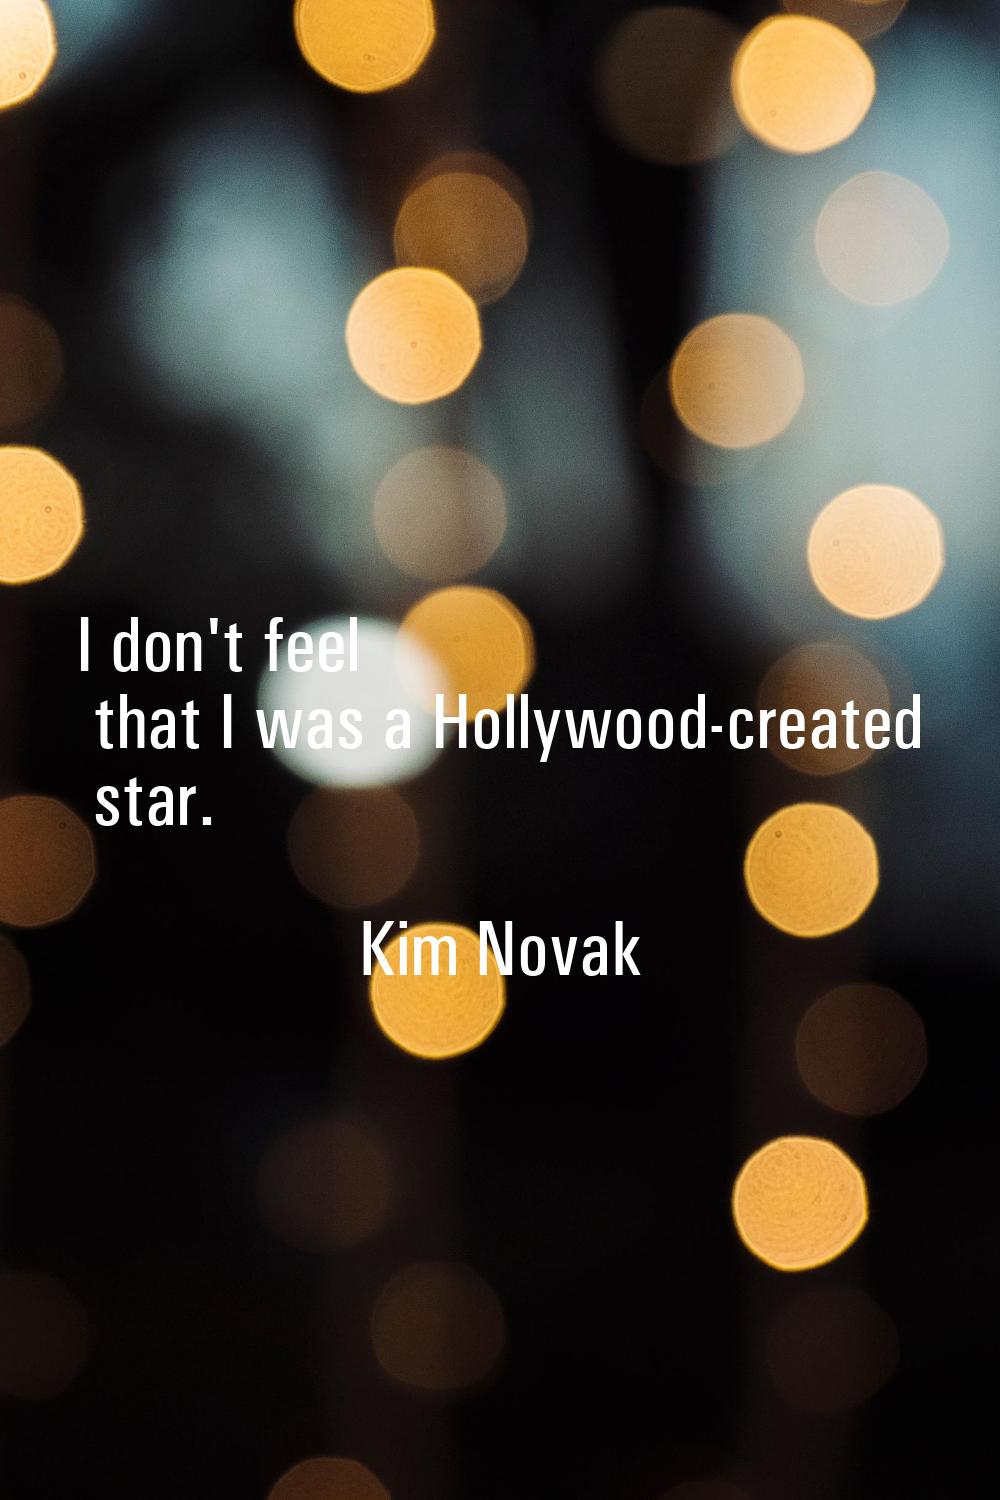 I don't feel that I was a Hollywood-created star.